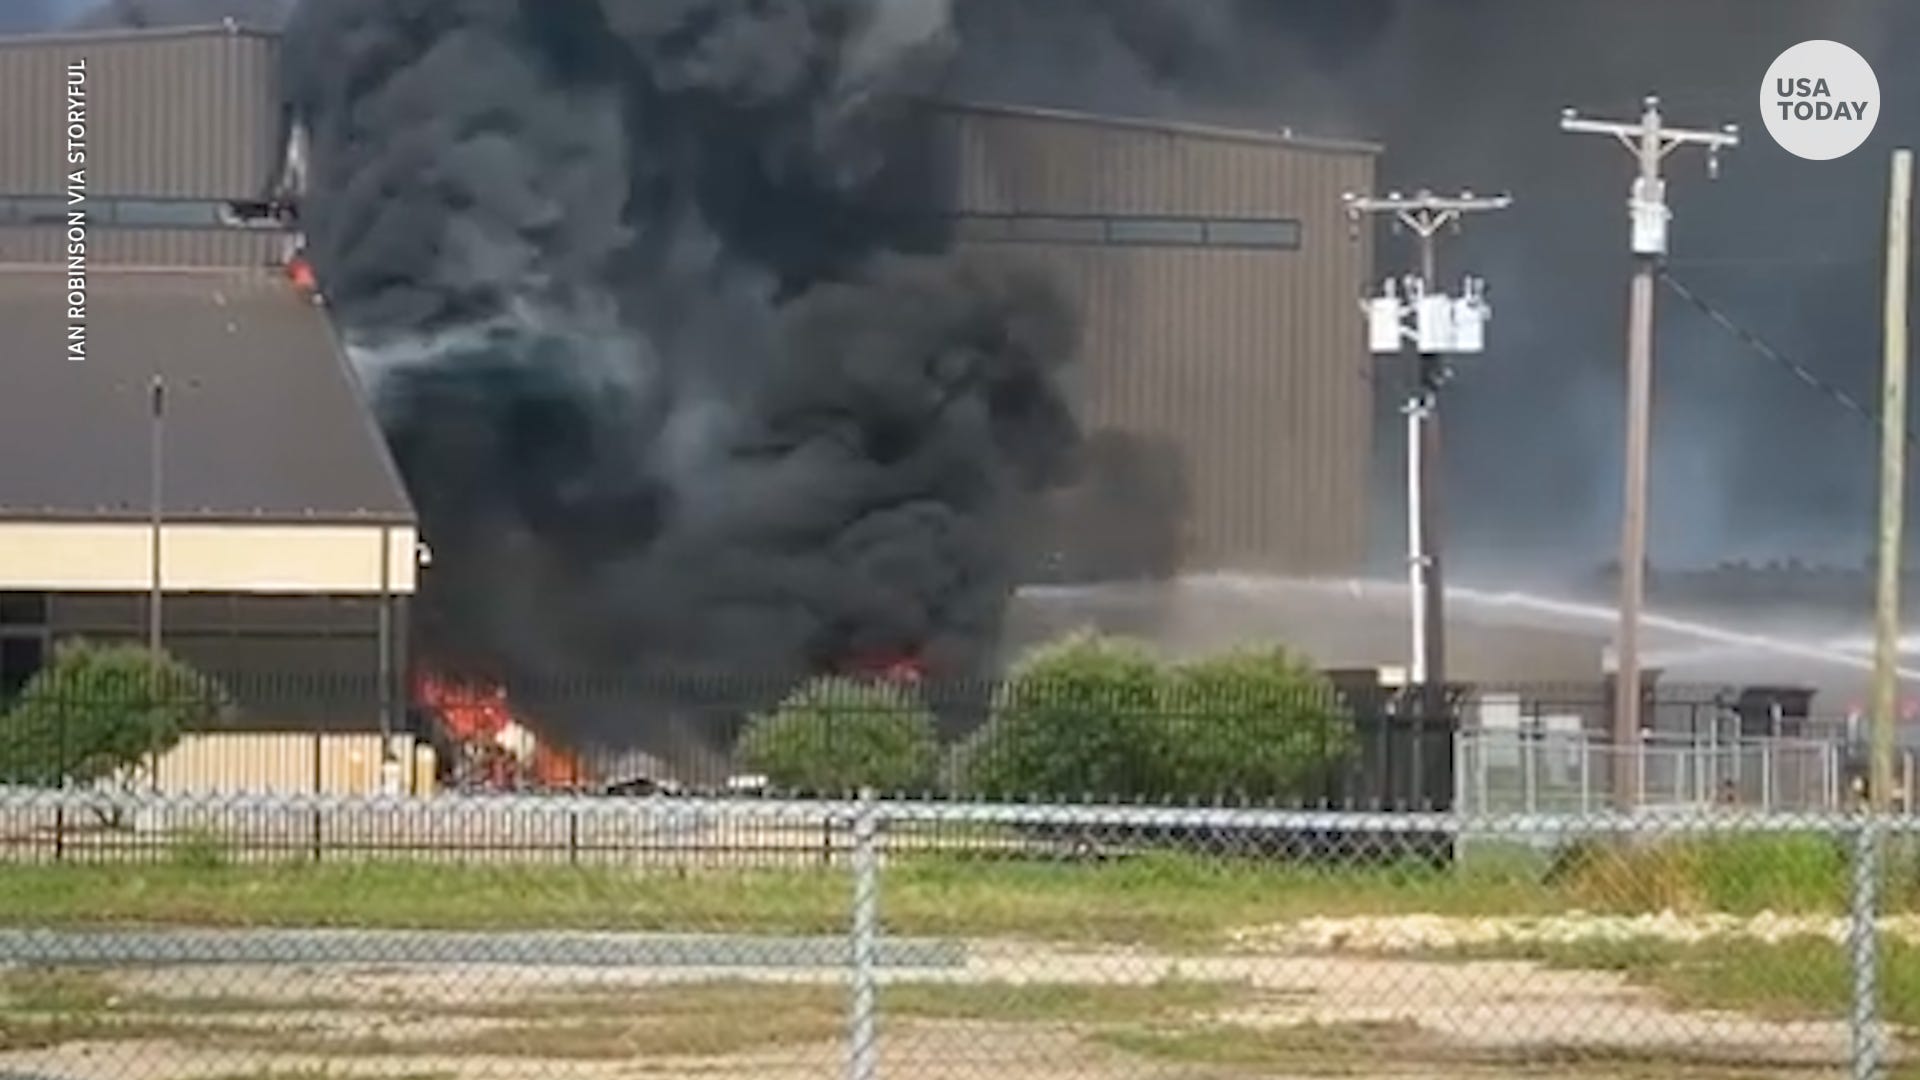 Texas Plane Crash Beechcraft Be King Air Was Sold Just Months Ago